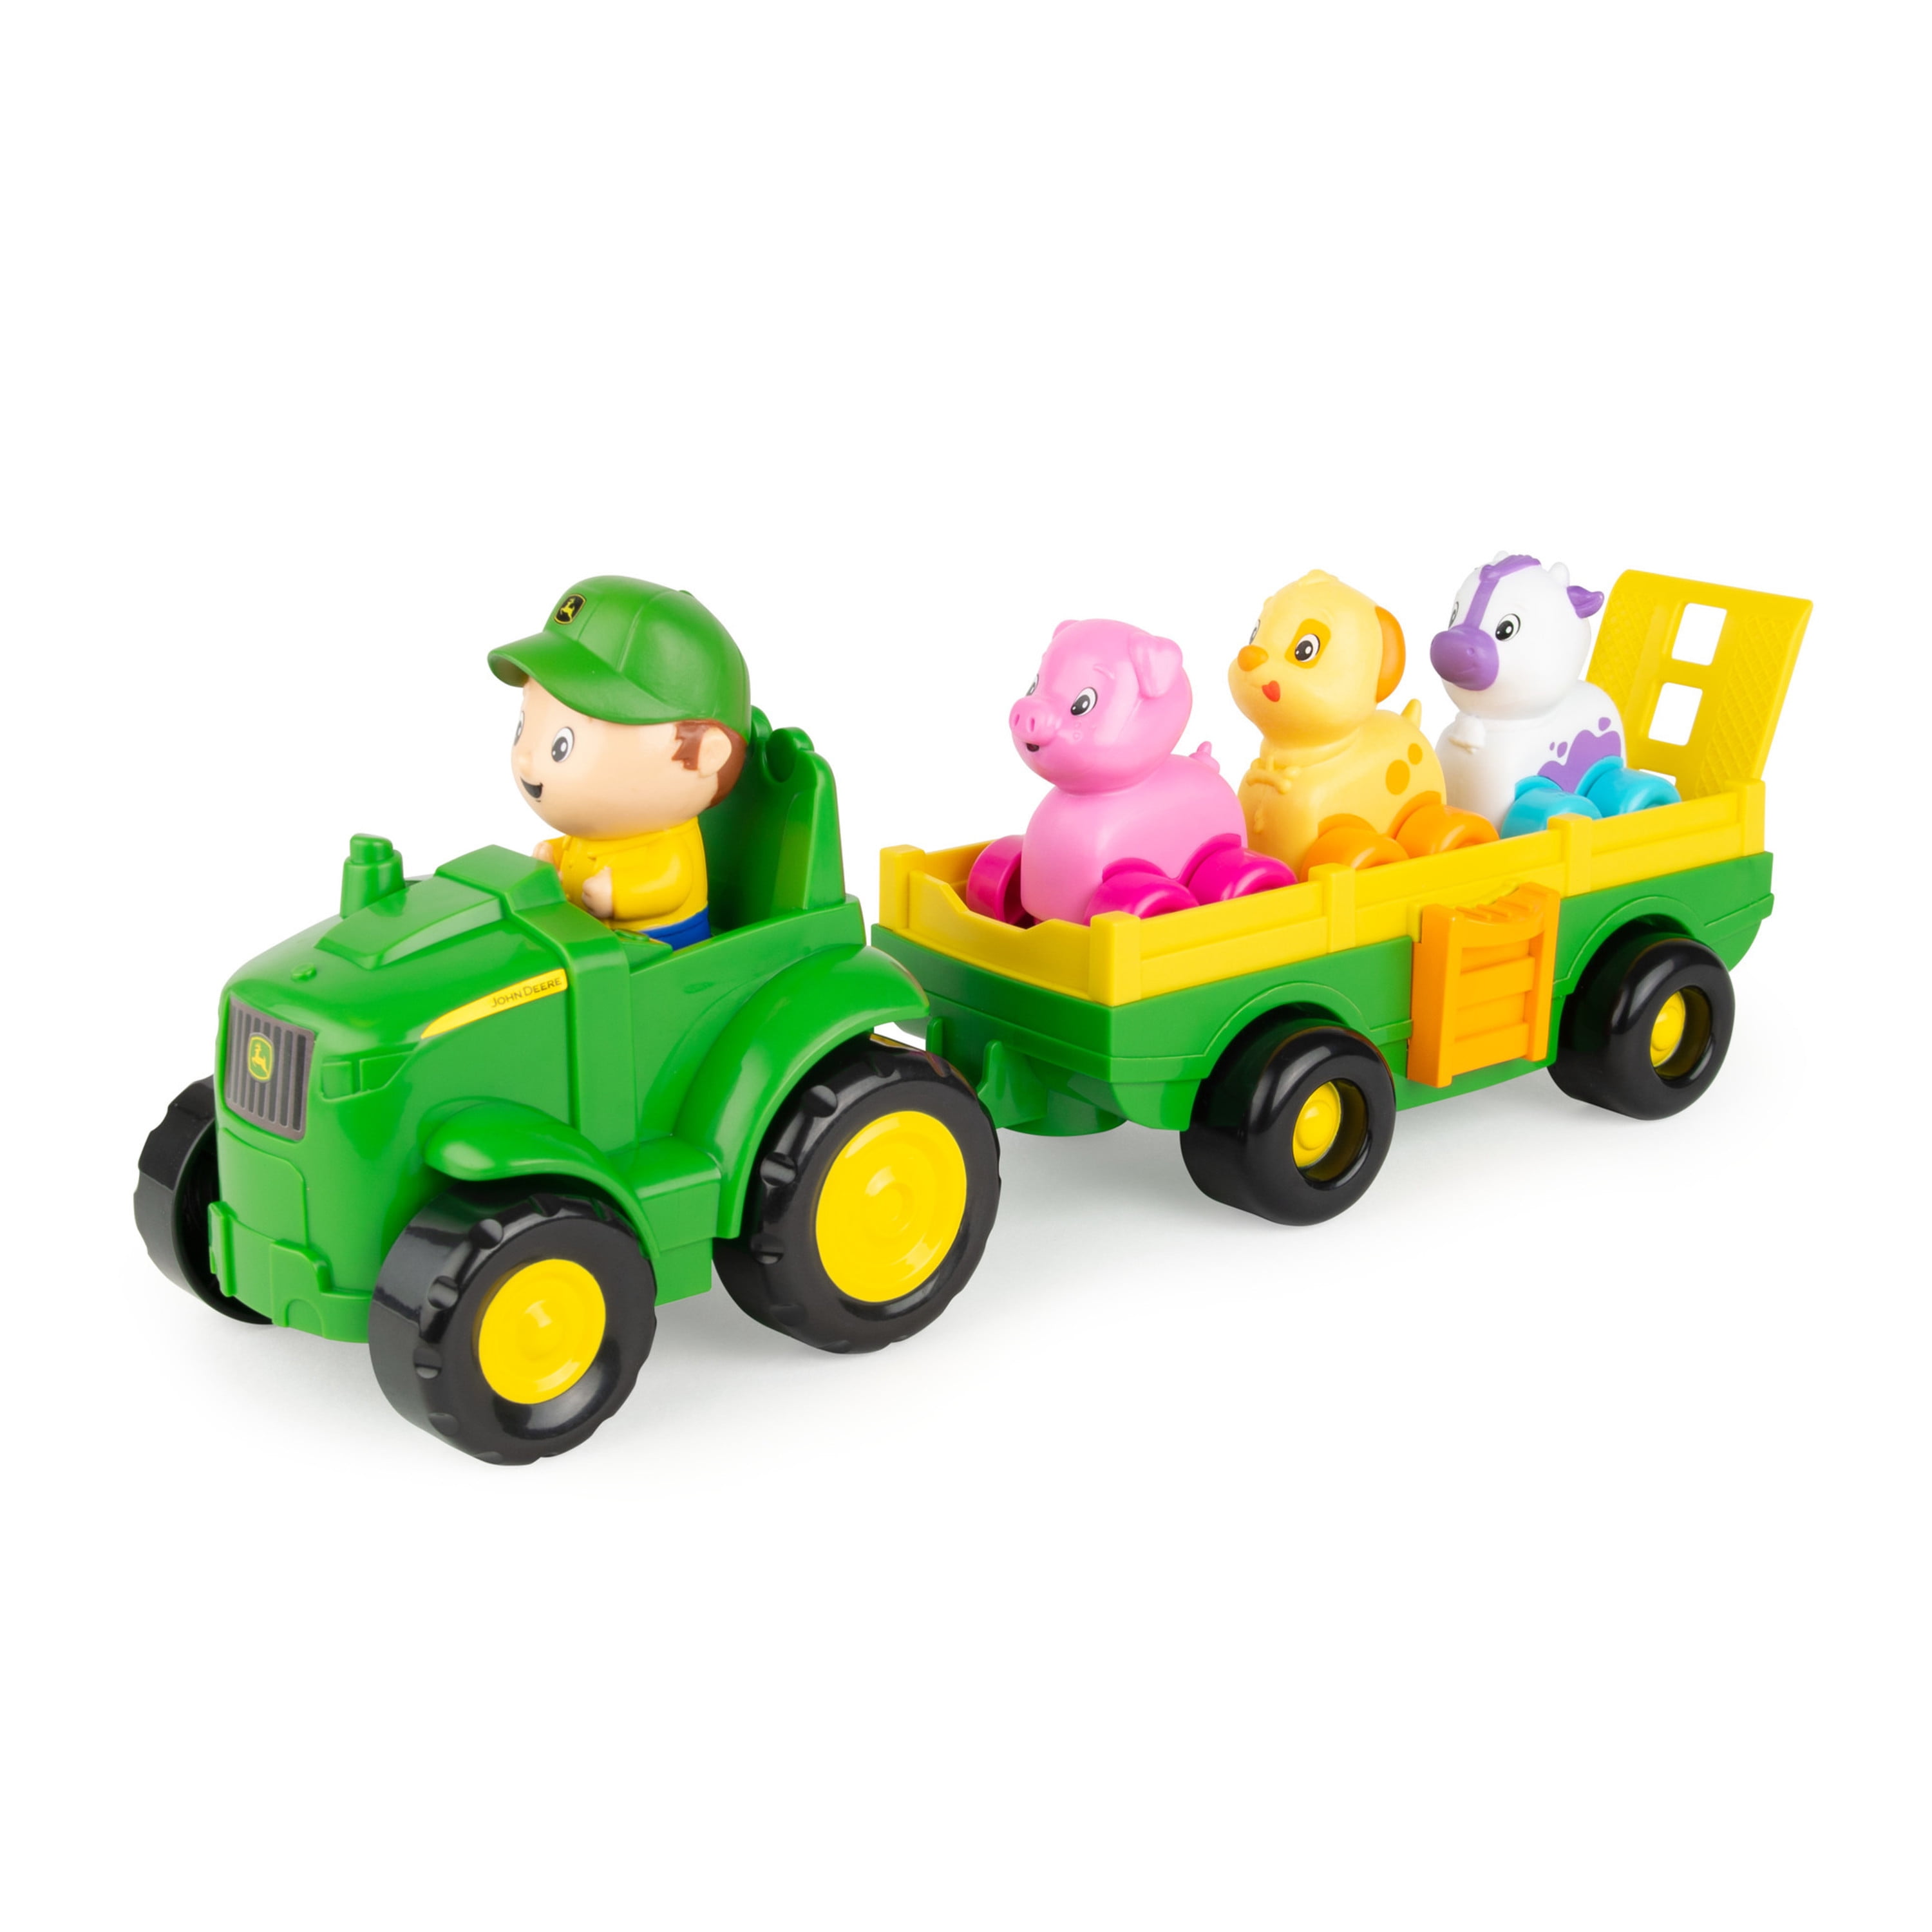 John Deere Animal Sounds Wagon Ride - Grow with Me Toy Ages 12m+ -  